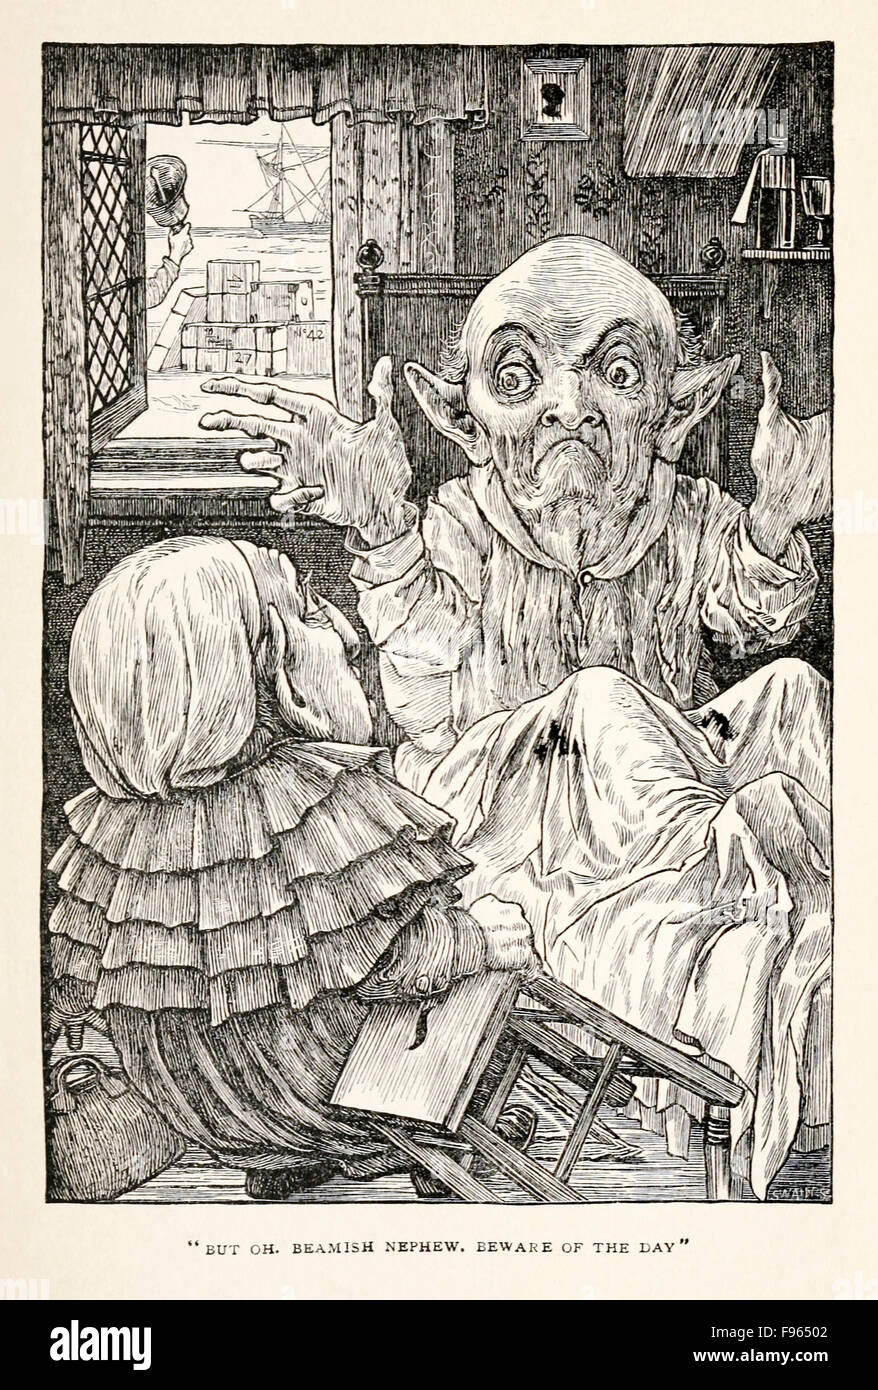 The Baker listening to his Uncle from Fit the Third 'The Baker's Tales' in 'The Hunting of the Snark – An Agony in Eight Fits’ by Lewis Carroll (1832-1898), illustrated by Henry Holiday (1839-1927). See description for more information. Stock Photo